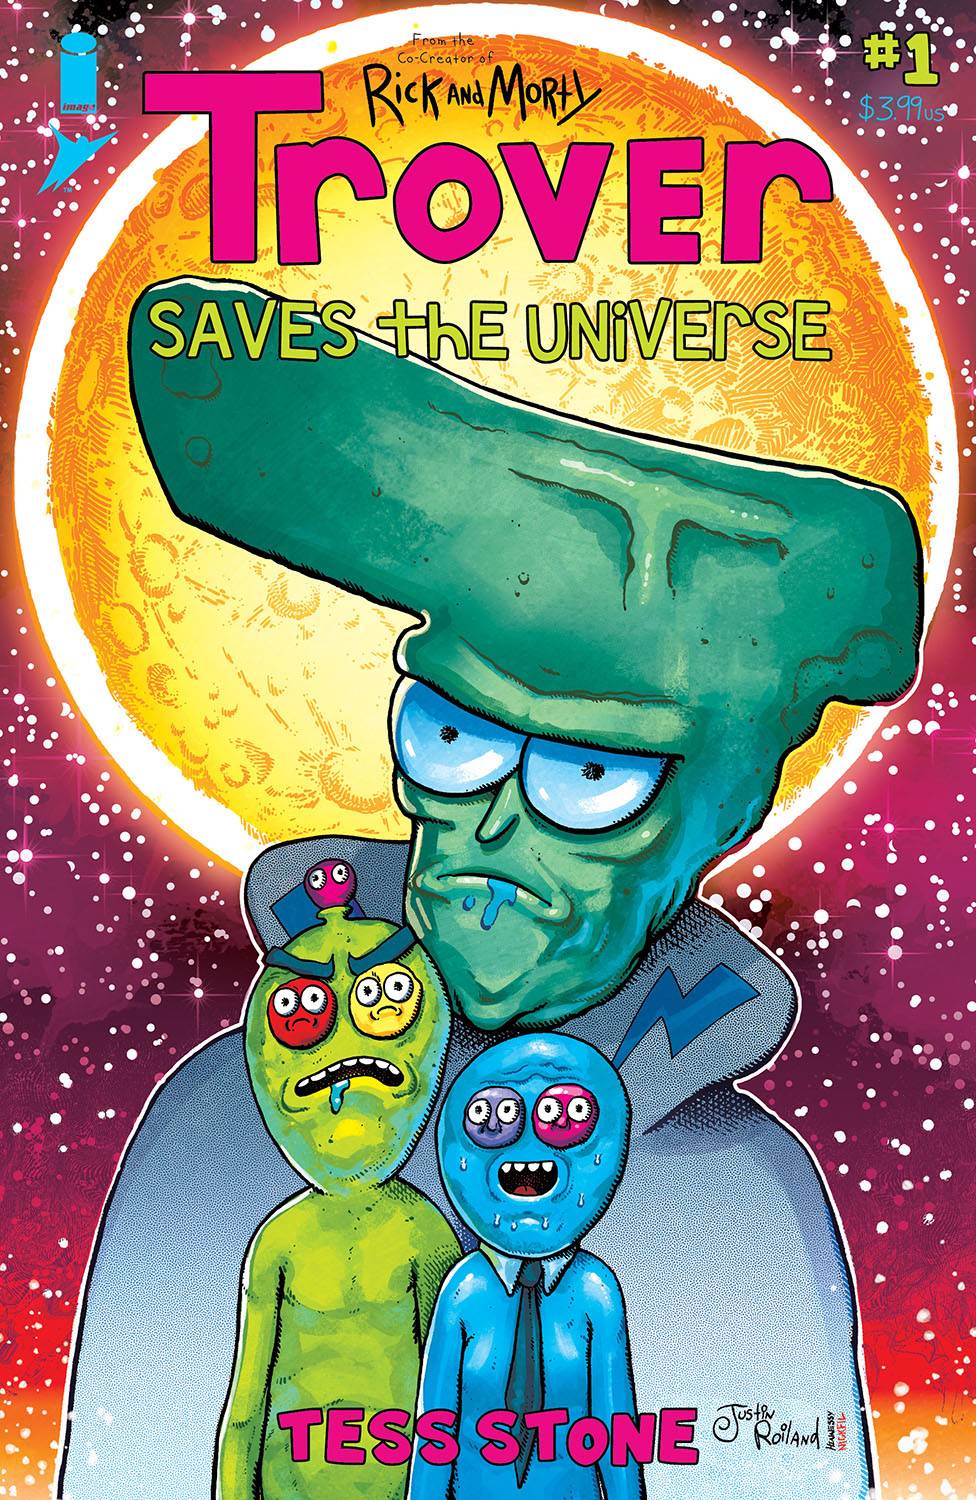 TROVER SAVES THE UNIVERSE #1 (OF 5) CVR B ROILAND & STONE